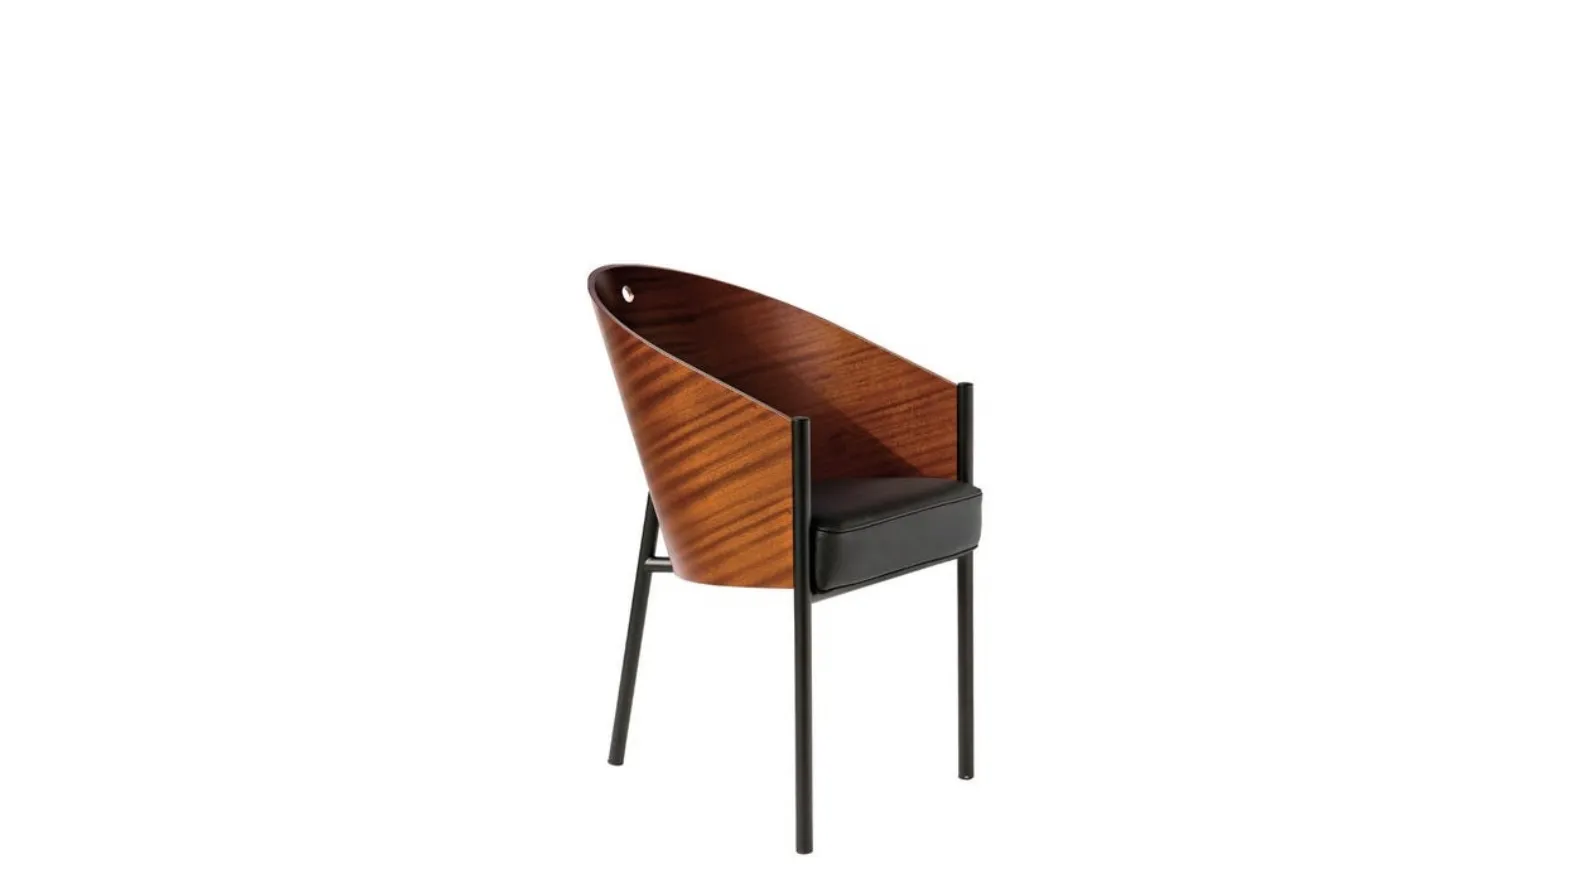 Wooden Costes chair with leather seat by Driade